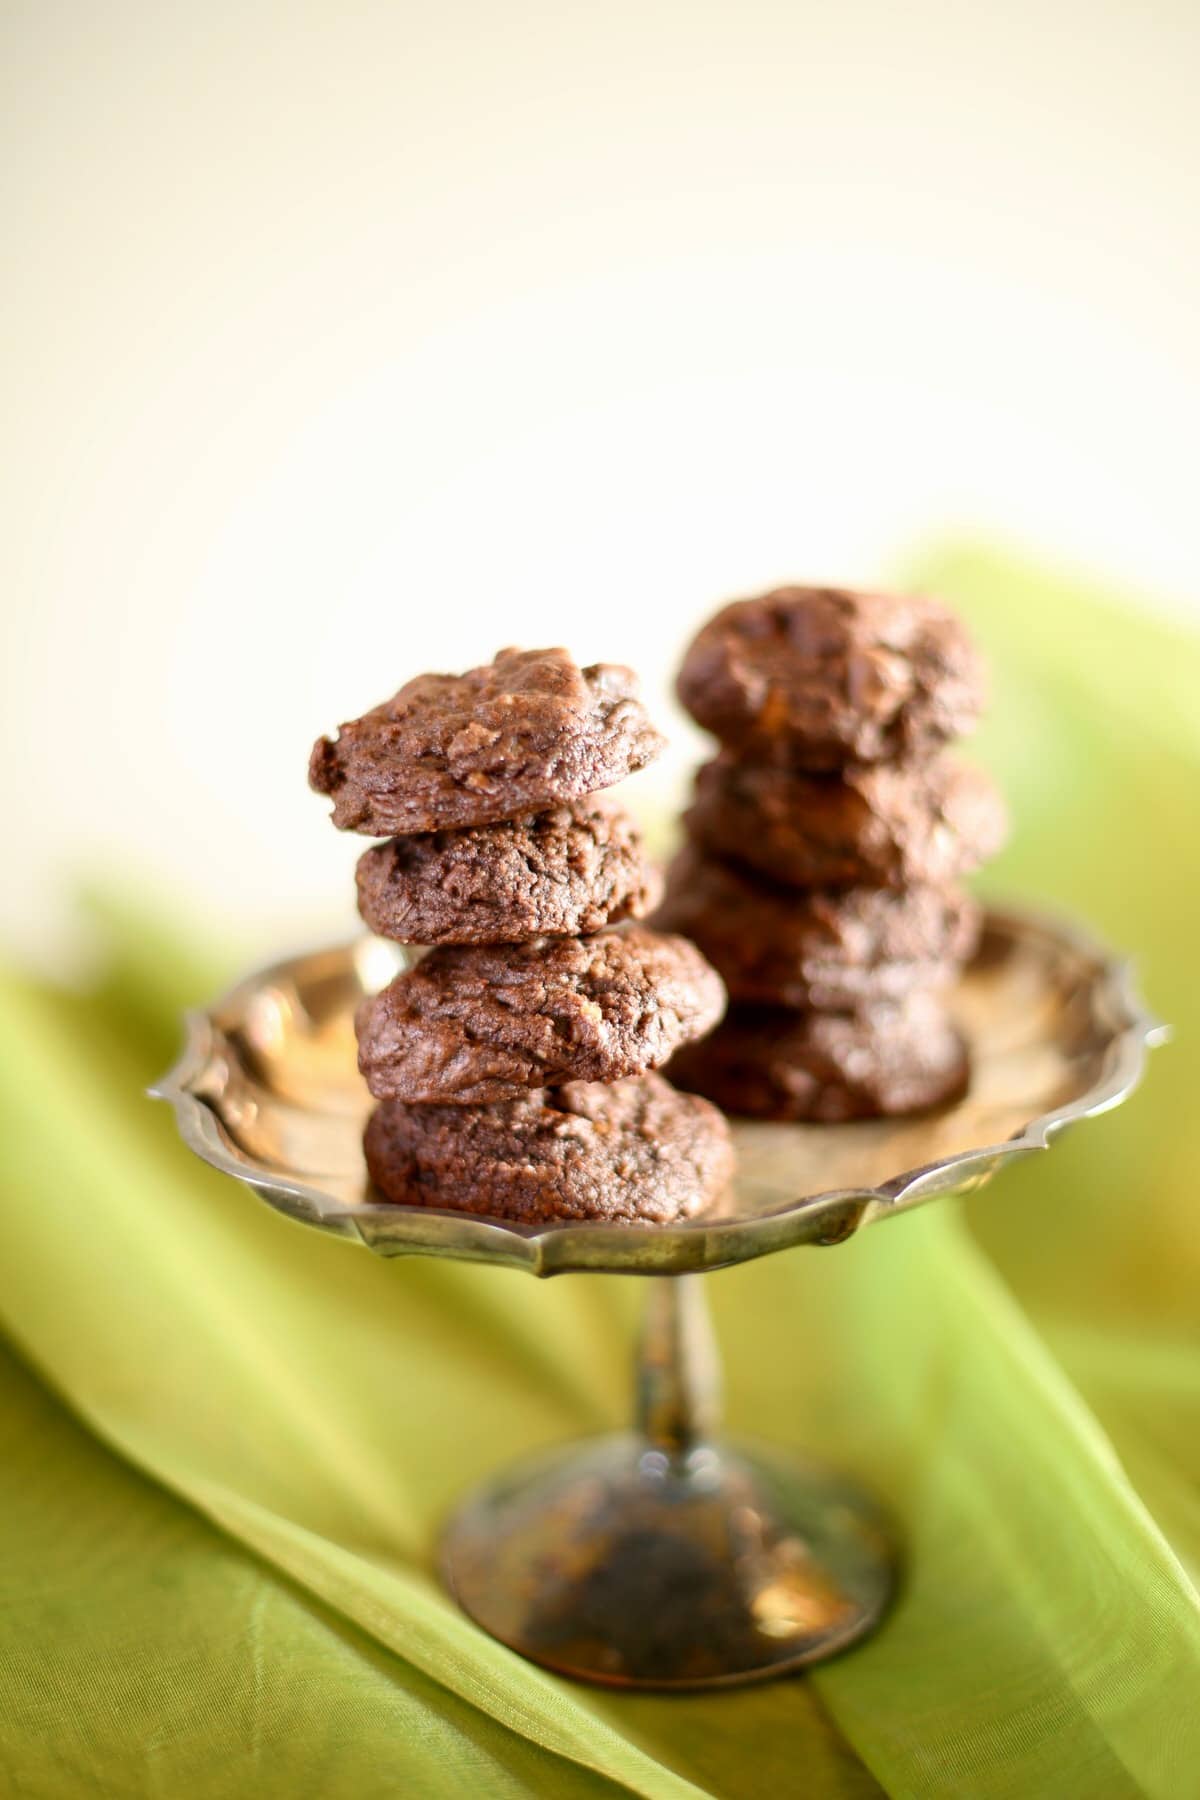 Chocolate cookies on a silver tray with green background